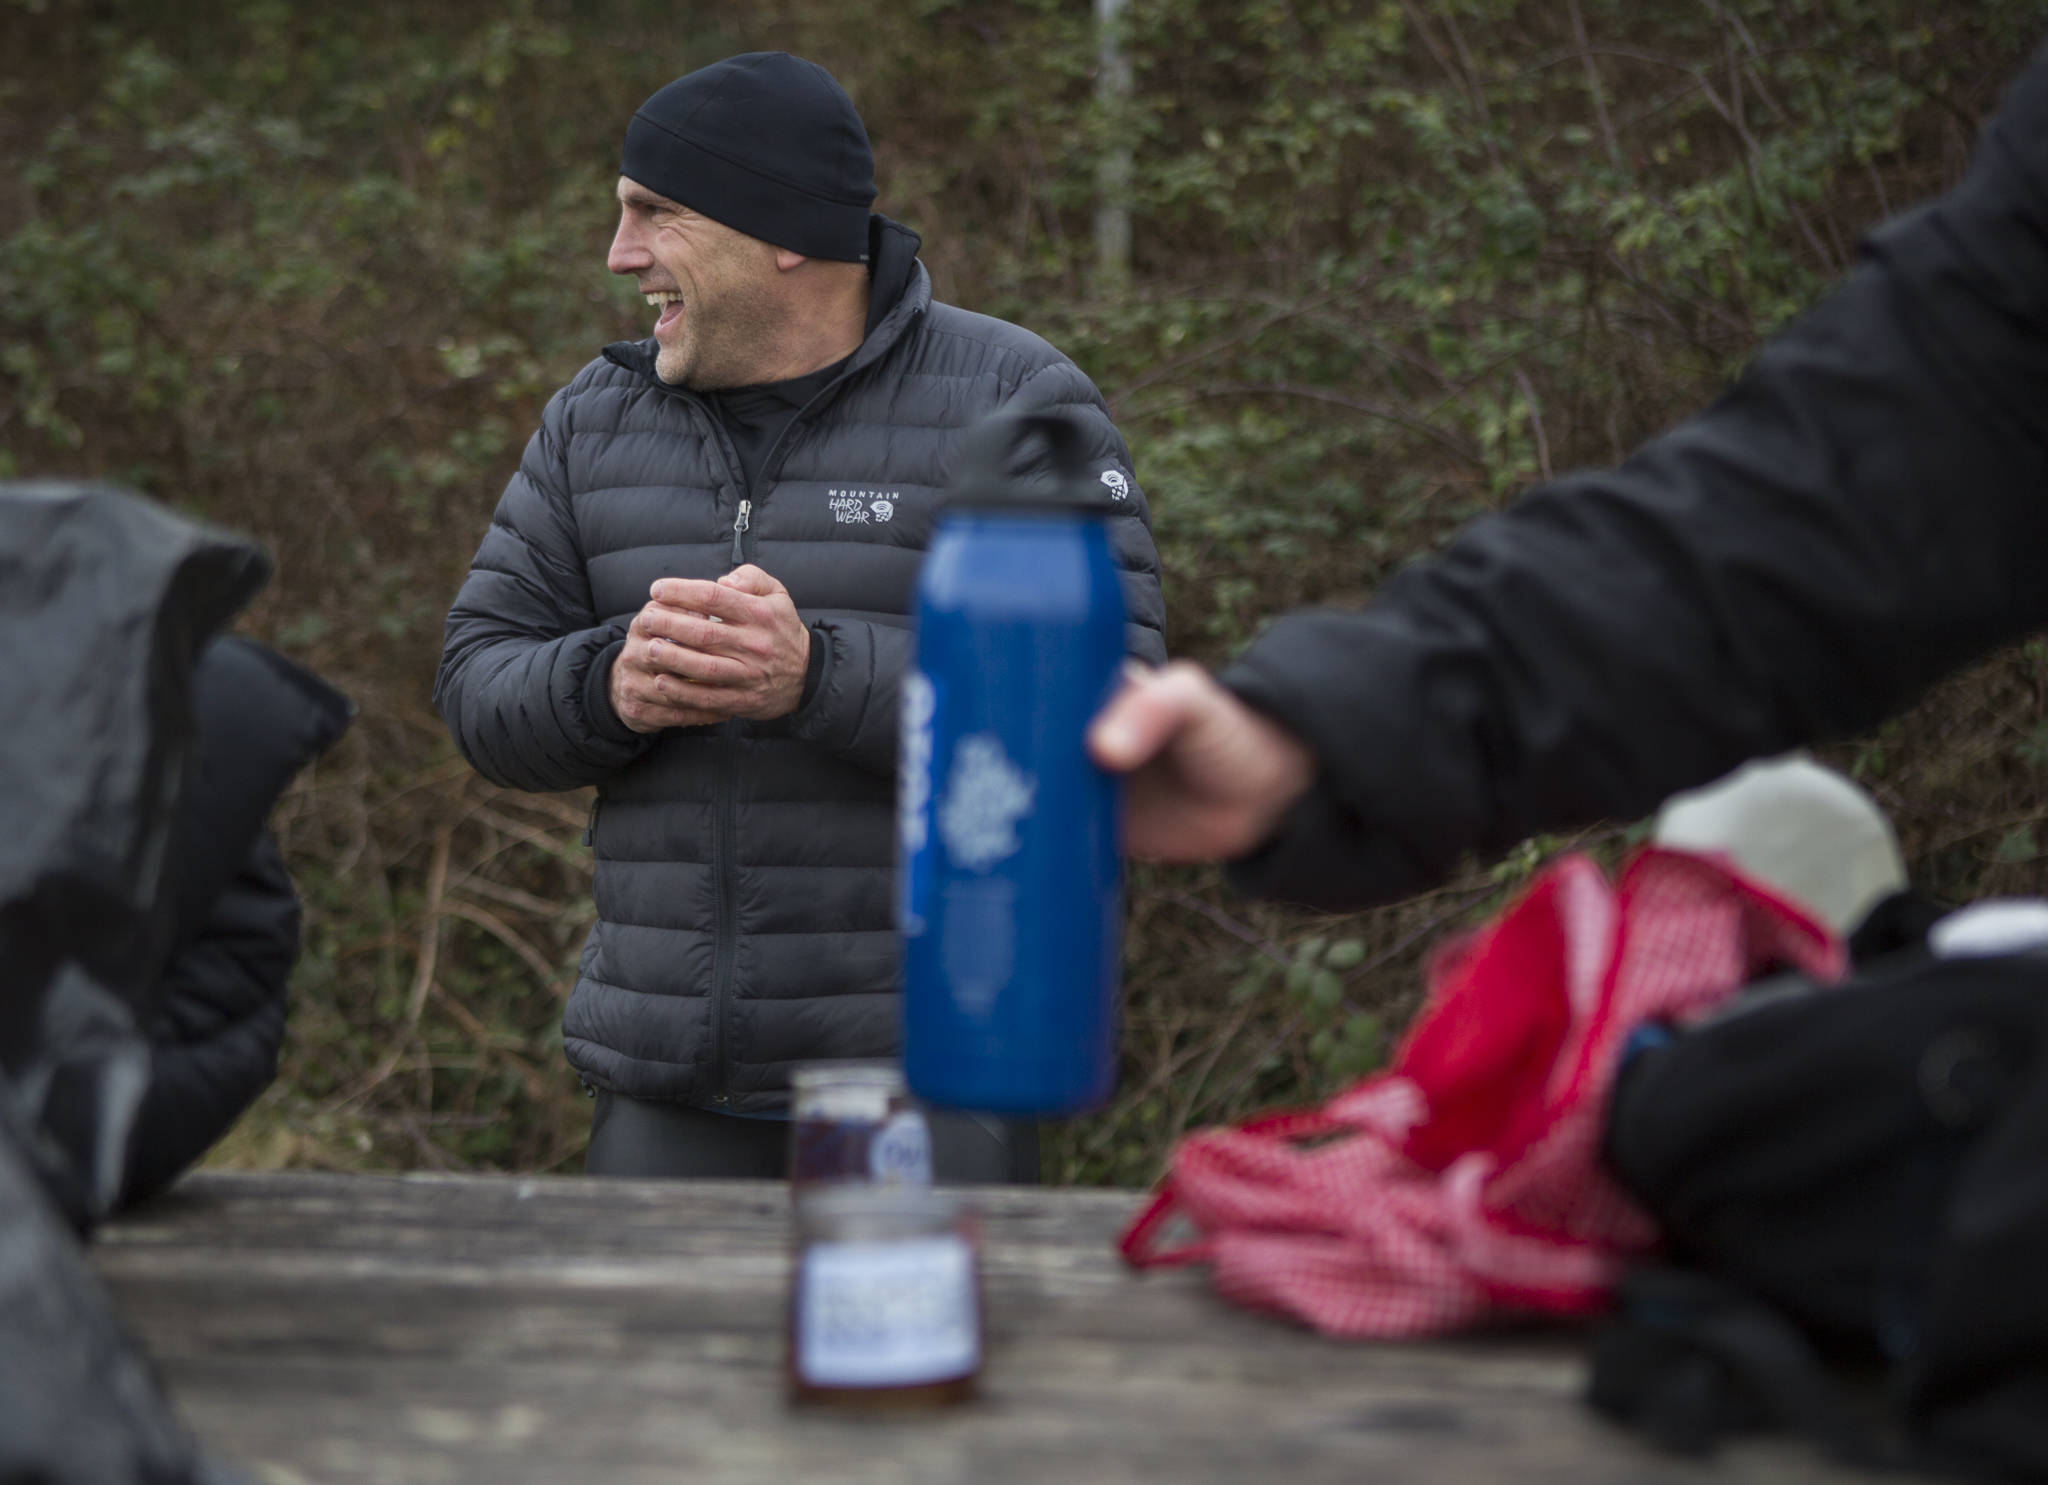 Joe Hempel laughs as passersby ask about what they are doing Jan. 29 while hot tea is passed around in Langley. (Olivia Vanni / The Herald)